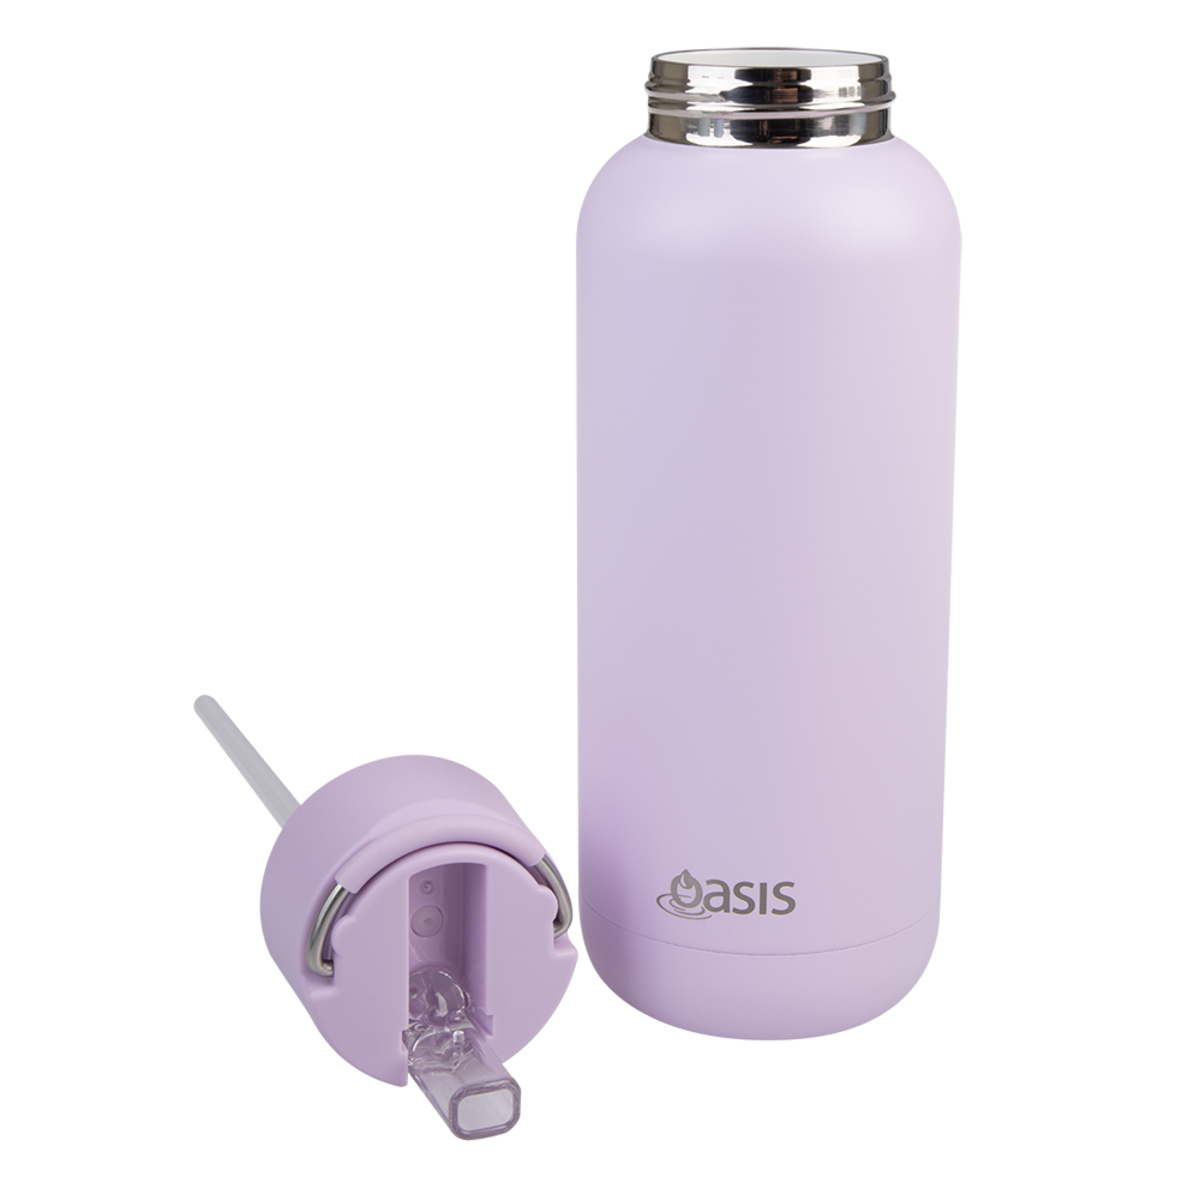 Oasis "moda" Ceramic Lined S/s Triple Wall Insulated Drink Bottle 1l - Orchid